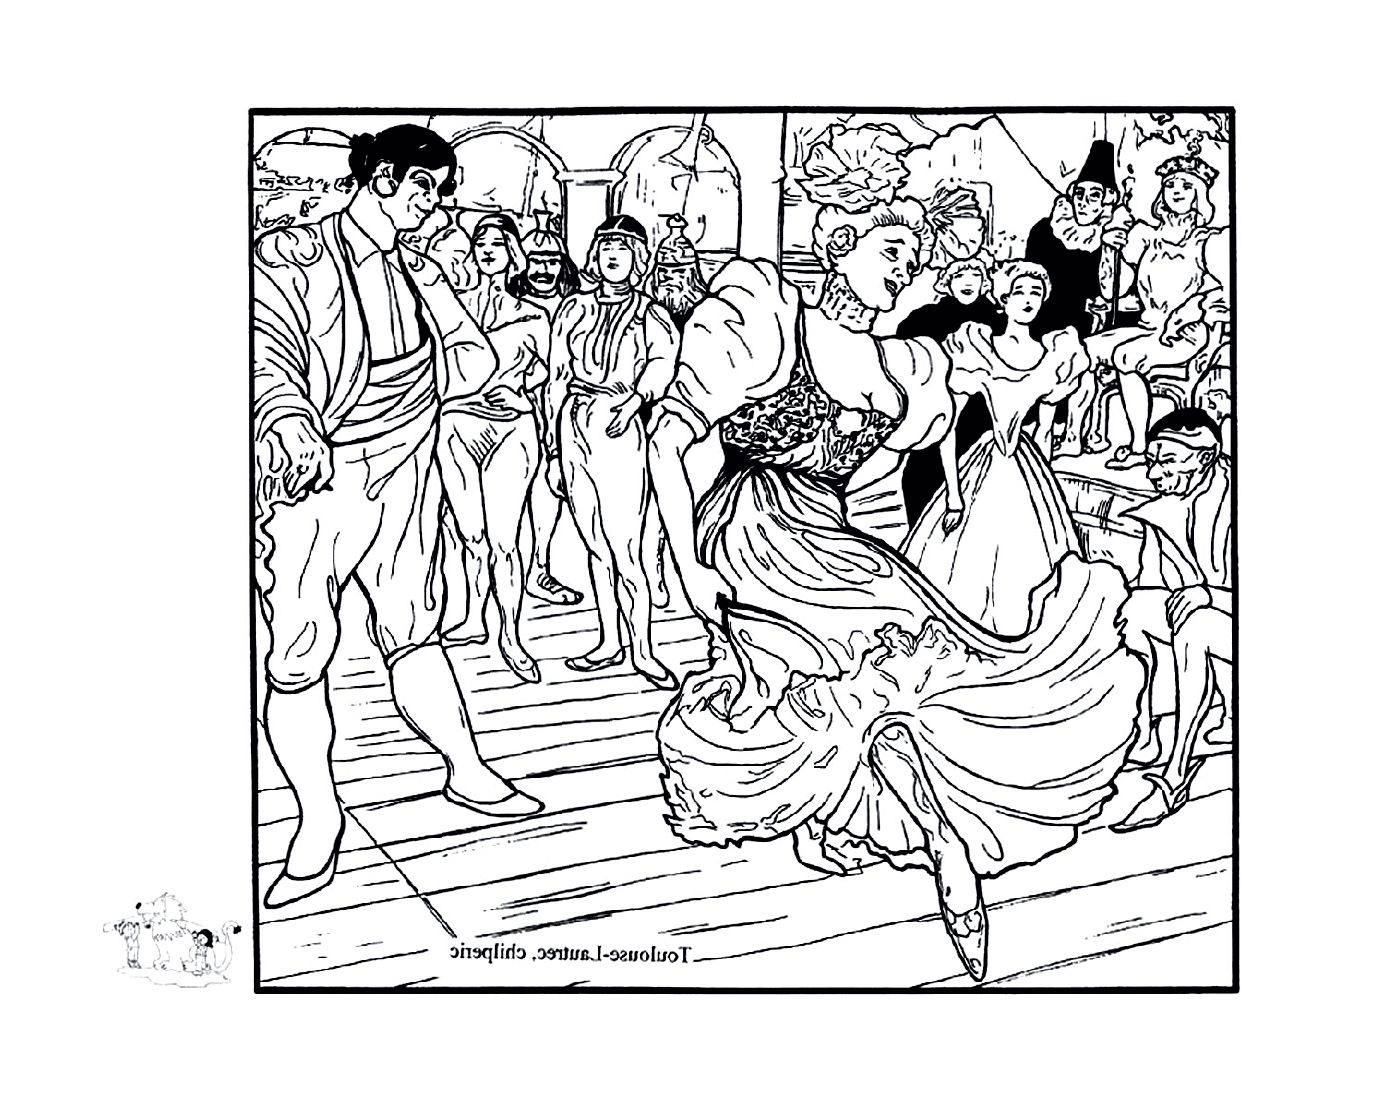  people who dance at a party like Toulouse-Lautrec 